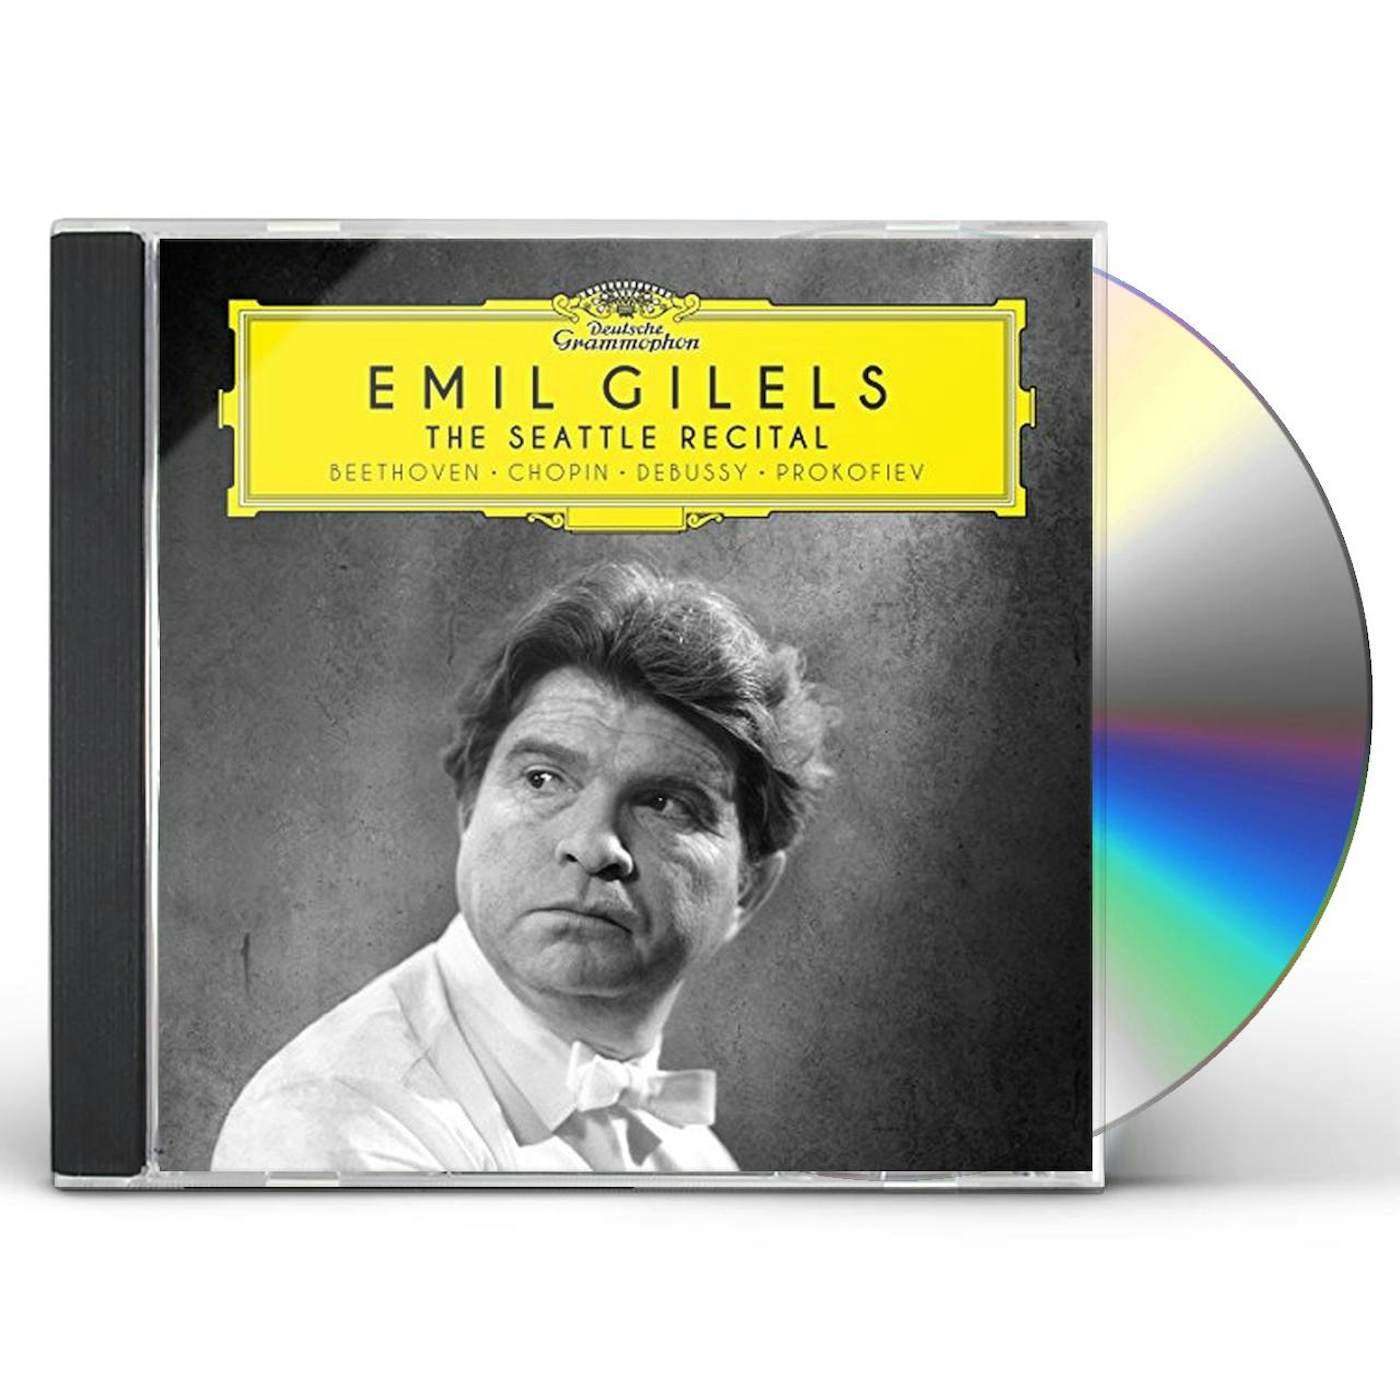 Emil Gilels SEATTLE RECITAL (BEETHOVEN / CHOPIN / DEBUSSY) CD